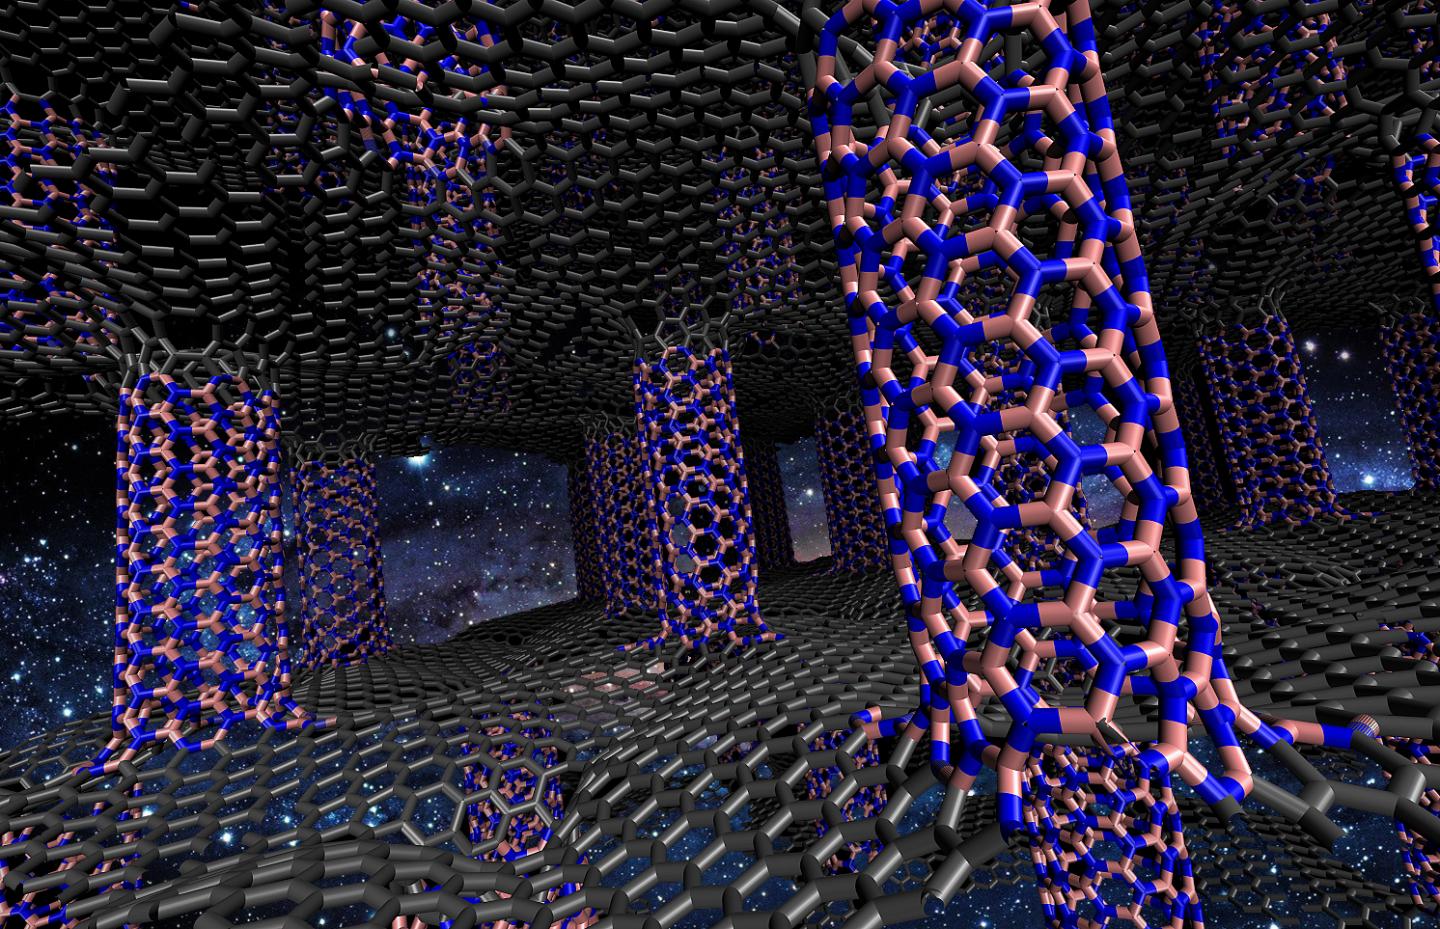 Caption: The calculated properties of a three-dimensional hybrid of graphene and boron nitride nanotubes would have pseudomagnetic properties, according to researchers at Rice University and Montreal Polytechnic. Credit: Shahsavari Lab/Rice University